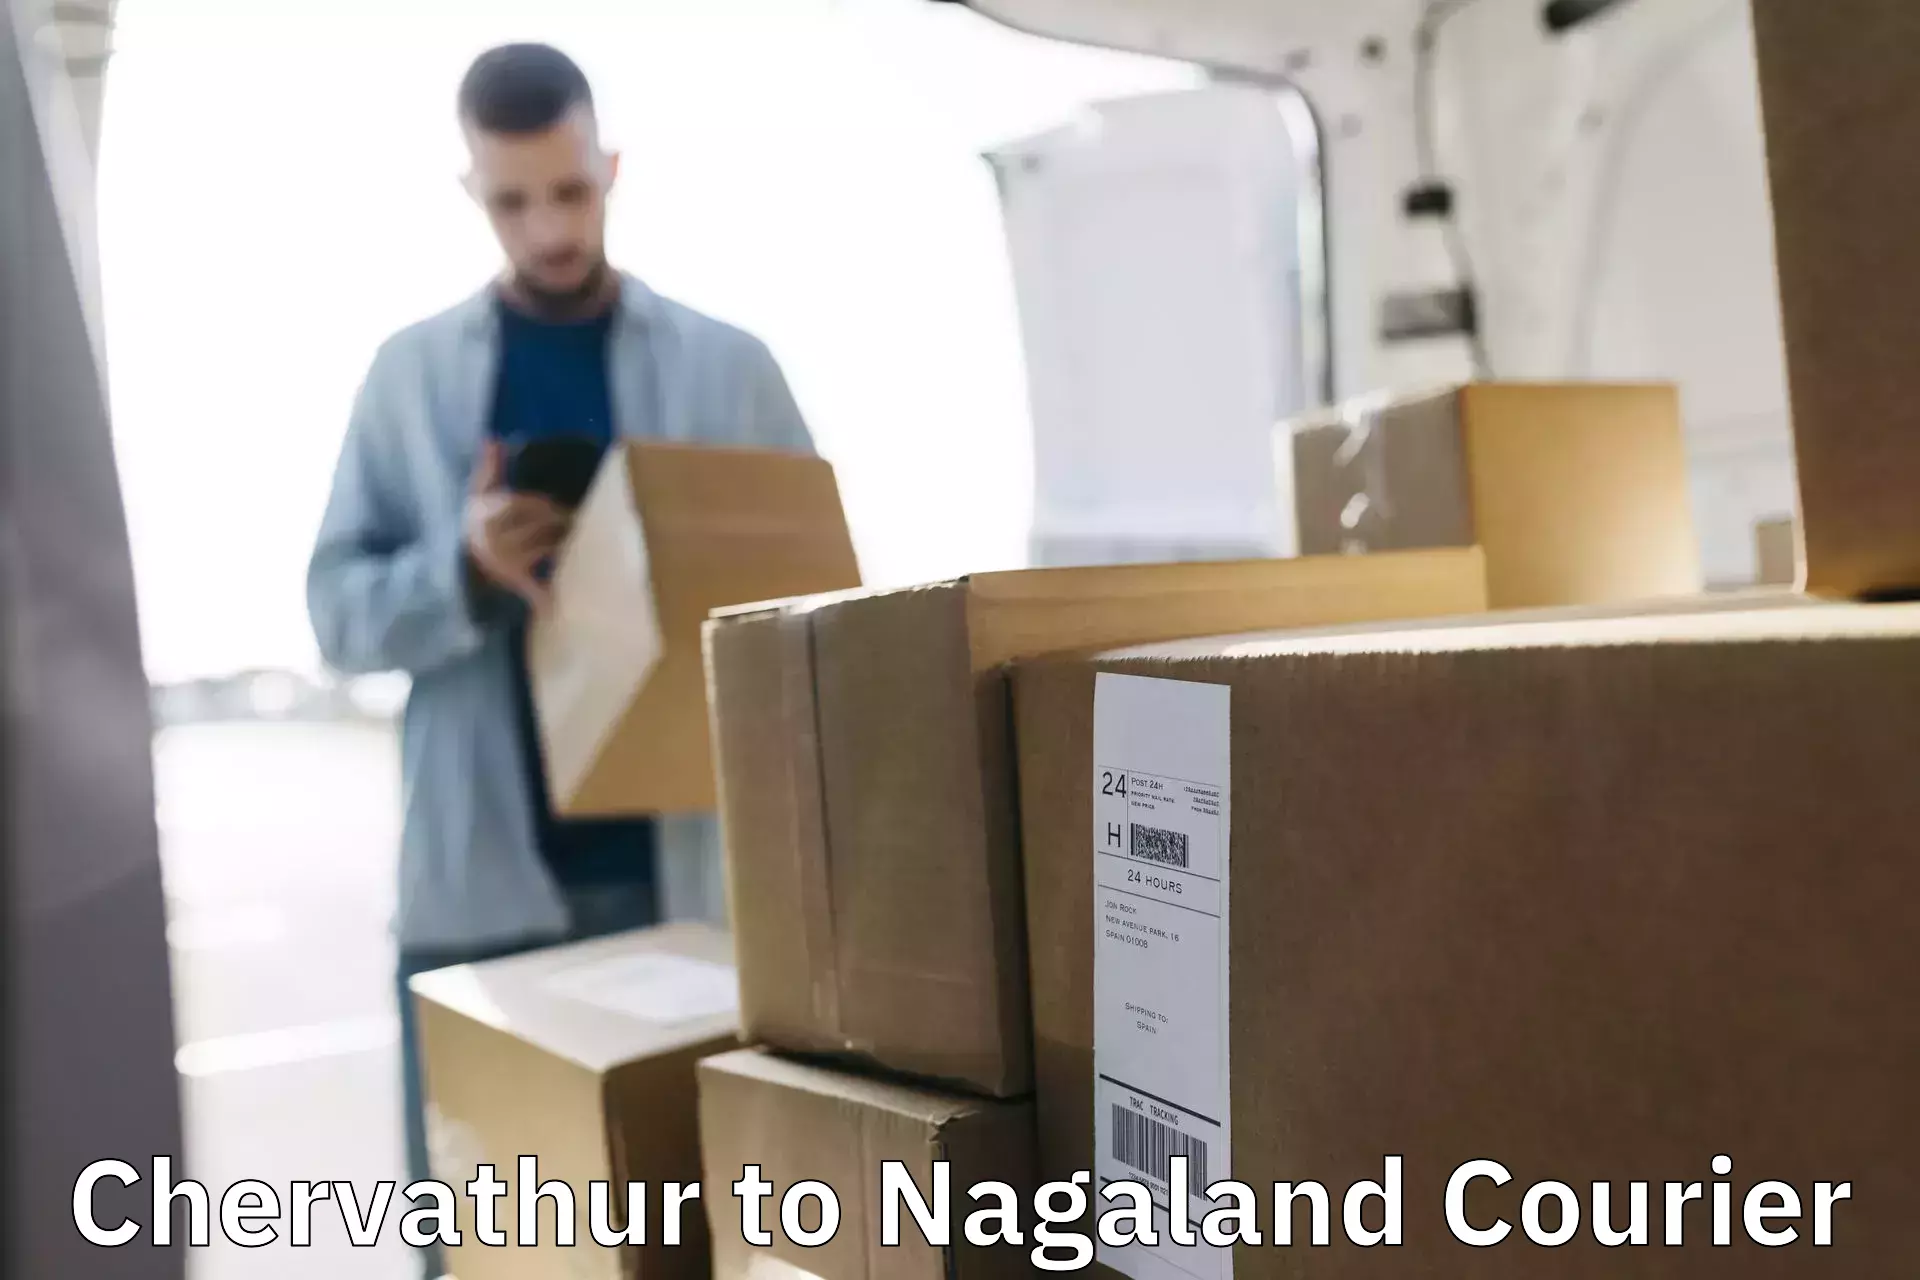 Rapid freight solutions Chervathur to Nagaland